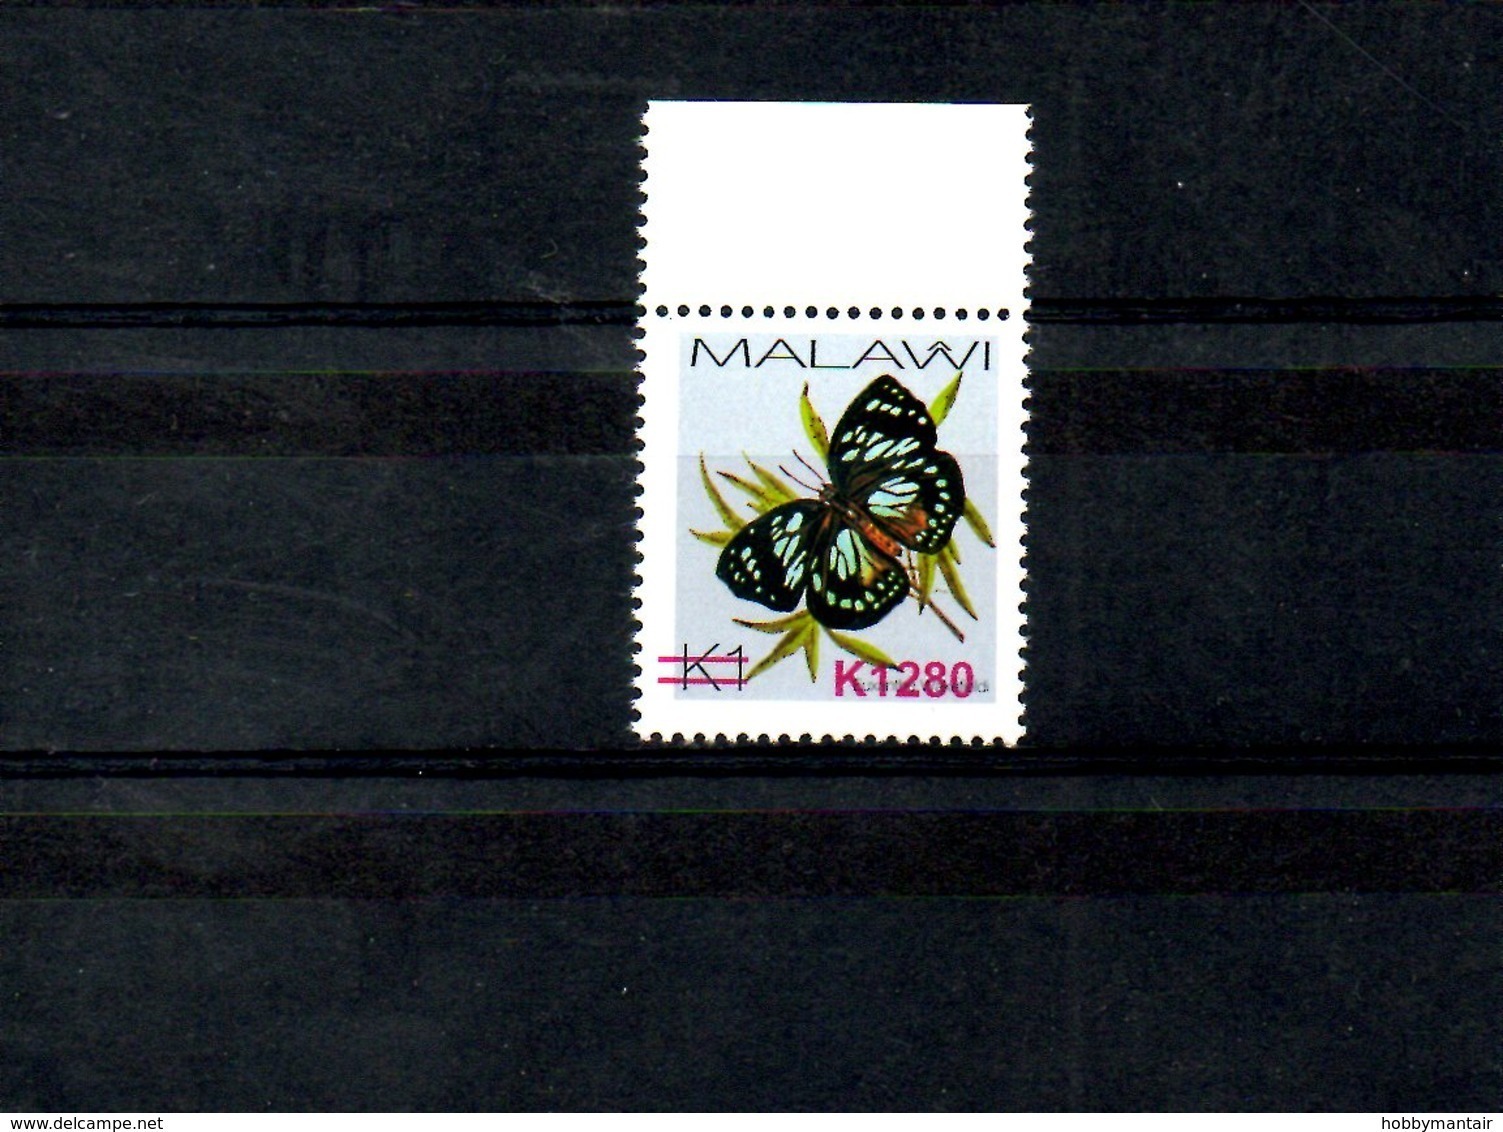 MALAWI, 2018, BUTTERFLY, O/P In Red, NEW VALUE, "k1280" 1v. MNH** NEW! - Papillons